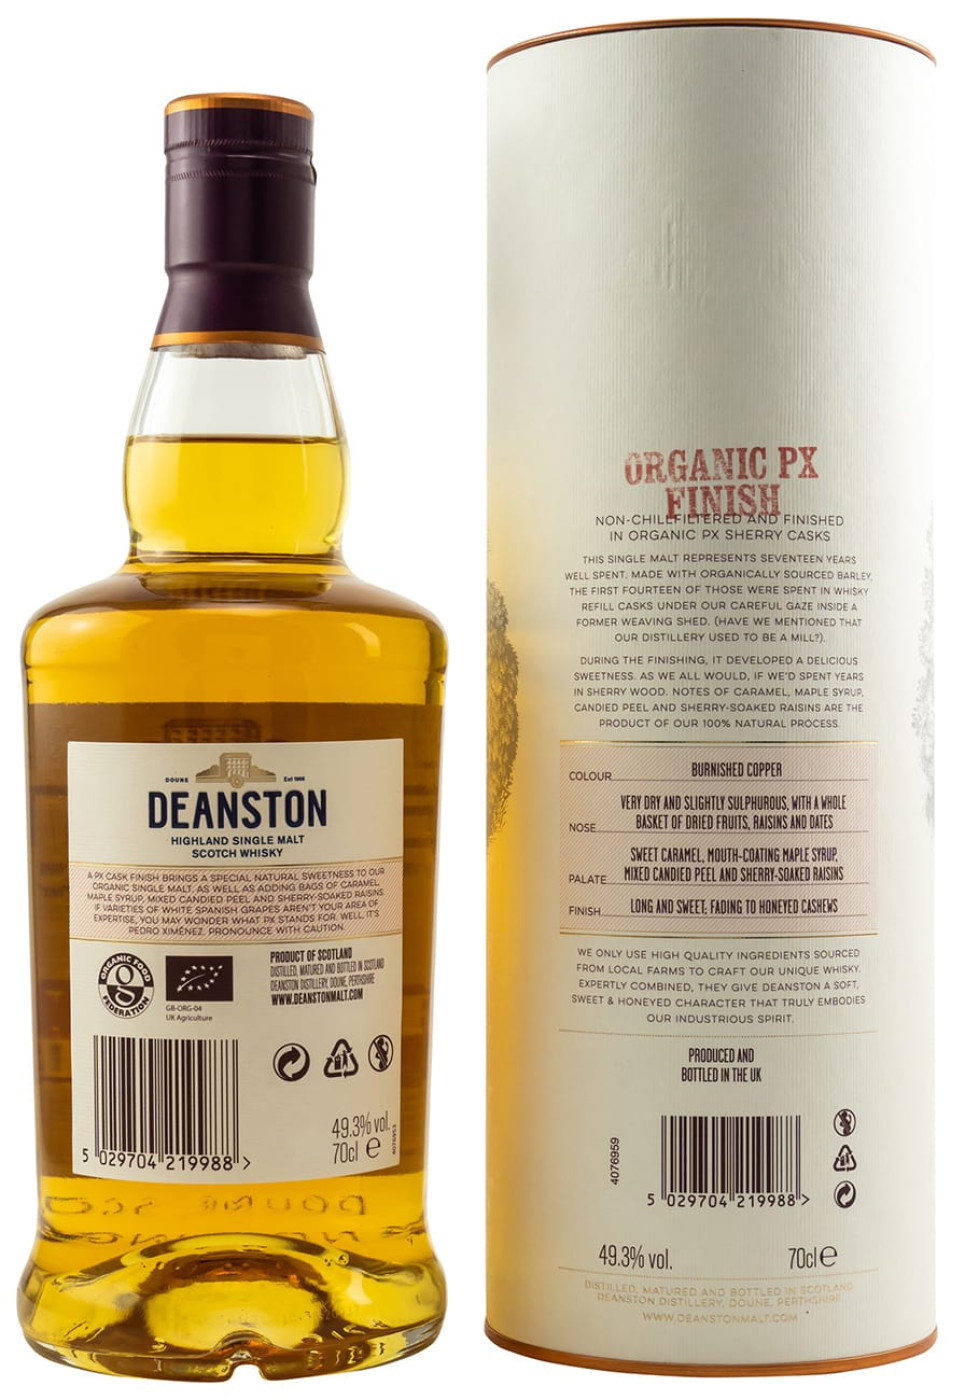  Deanston 2002 - 17 years old - Organic PX Cask, 0,7l, 49,3% 2002